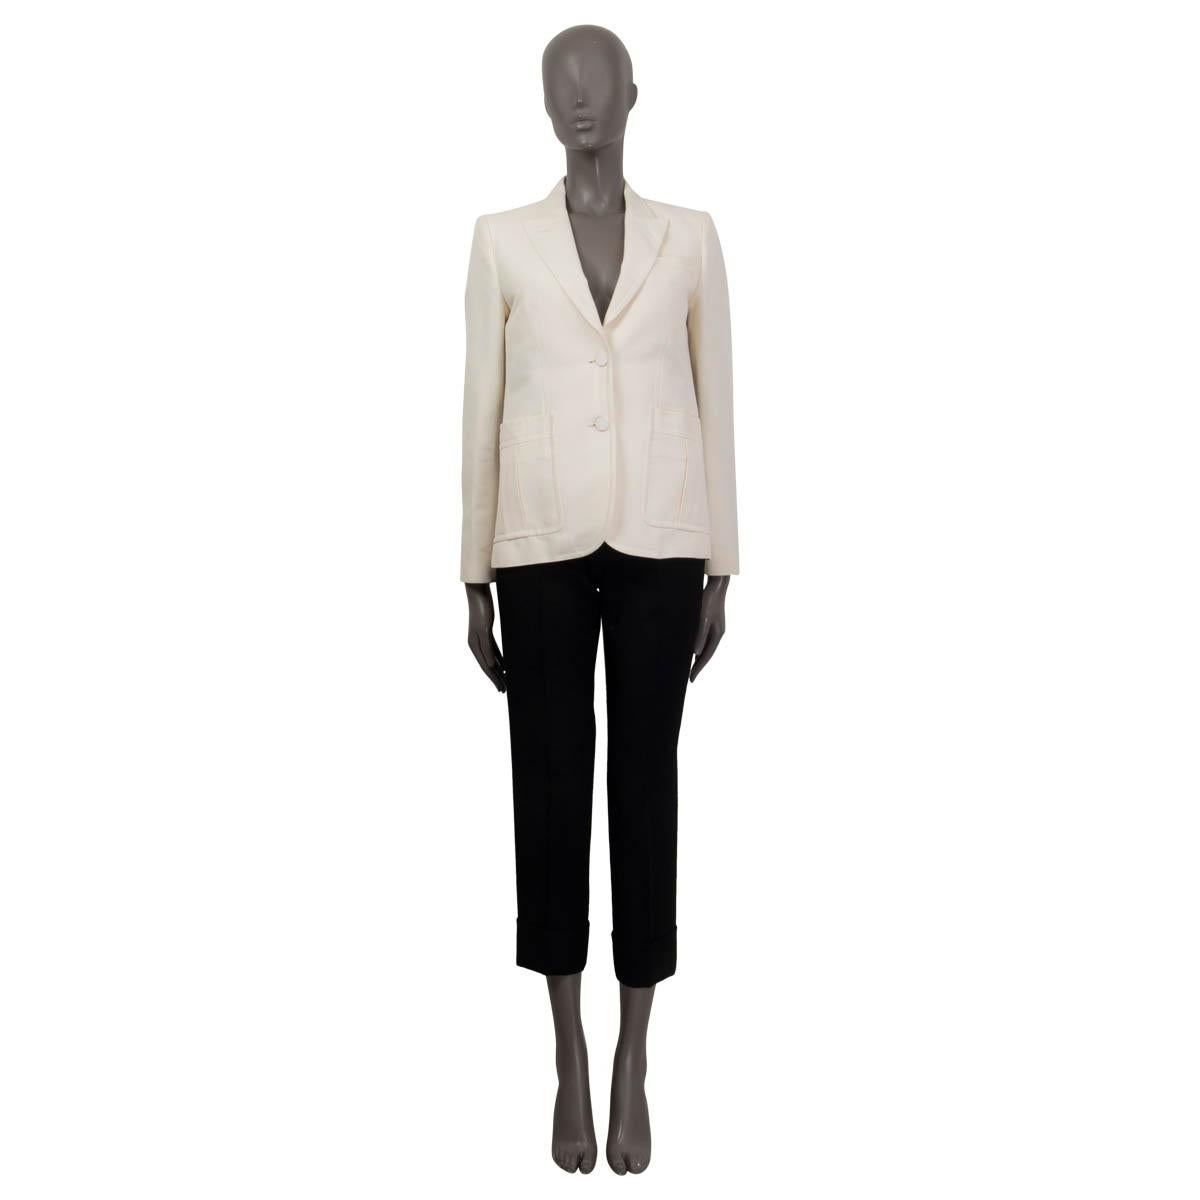 100% authentic Gucci classic single breasted blazer in ivory cotton (52%), polyamide (42%) and silk 86%). Features three pockets on the front and buttoned cuffs. Opens with two buttons on the front. Lined in ivory acetate (67%) and polyester (33%).